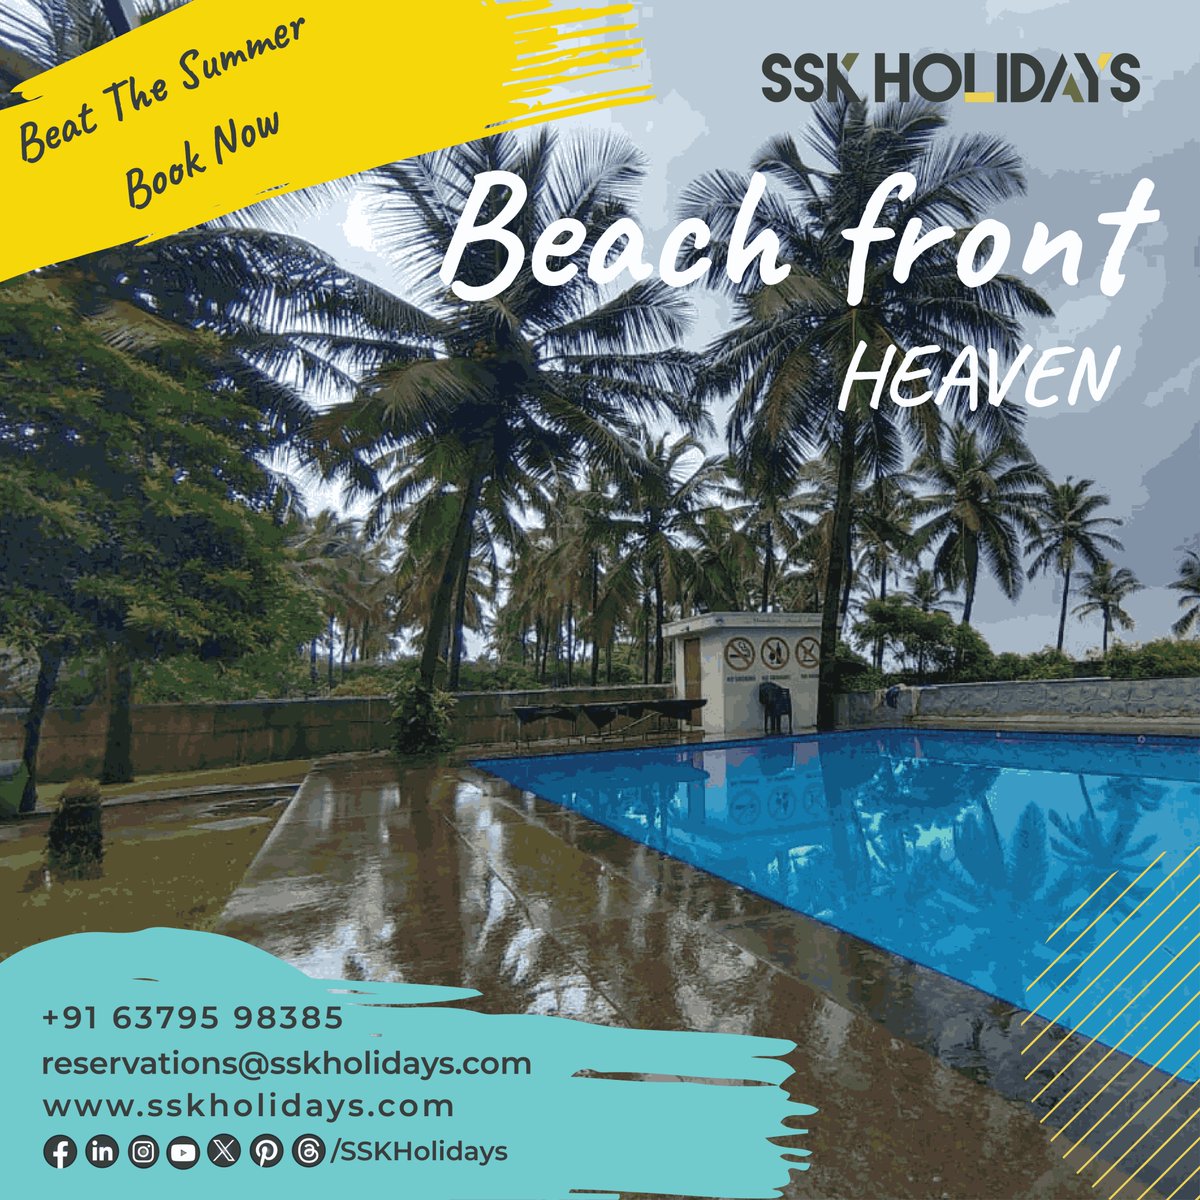 🌊 Welcome to Beach Front Heaven Resort! 🌴Indulge in the ultimate seaside escape at Beach Front Heaven Resort, where every moment is a blissful retreat! 🏖️(sskholidays.com)
#BeachFrontHeaven #SeasideEscape #LuxuryRetreat #TropicalGetaway #OceanViews #VacationGoals